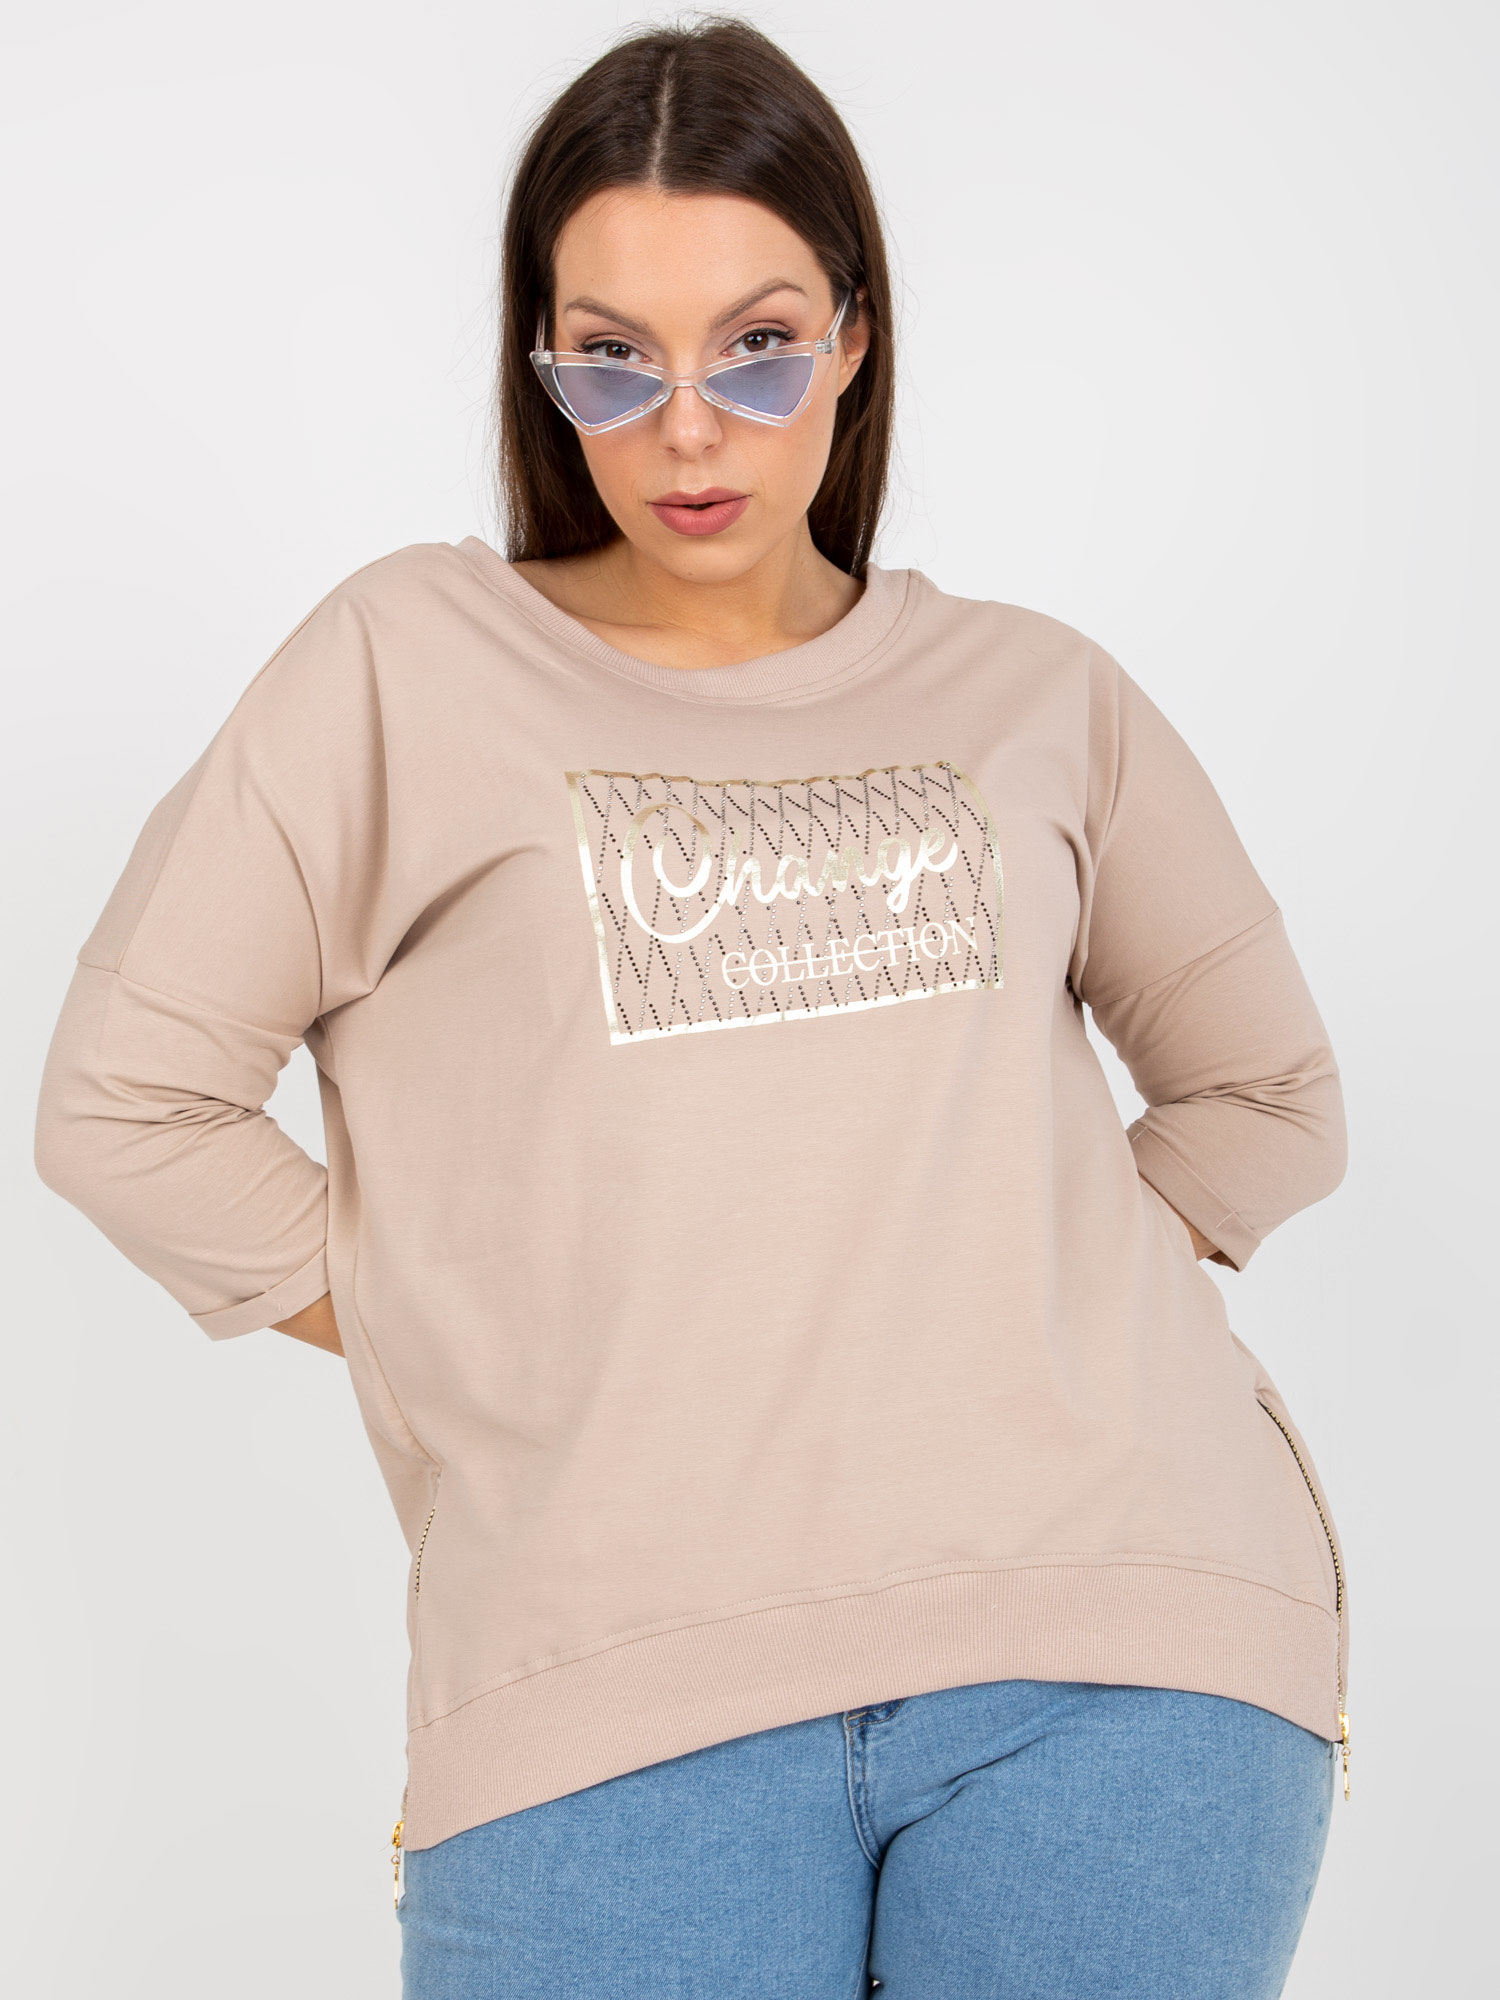 Beige blouse of larger size with rhinestone application